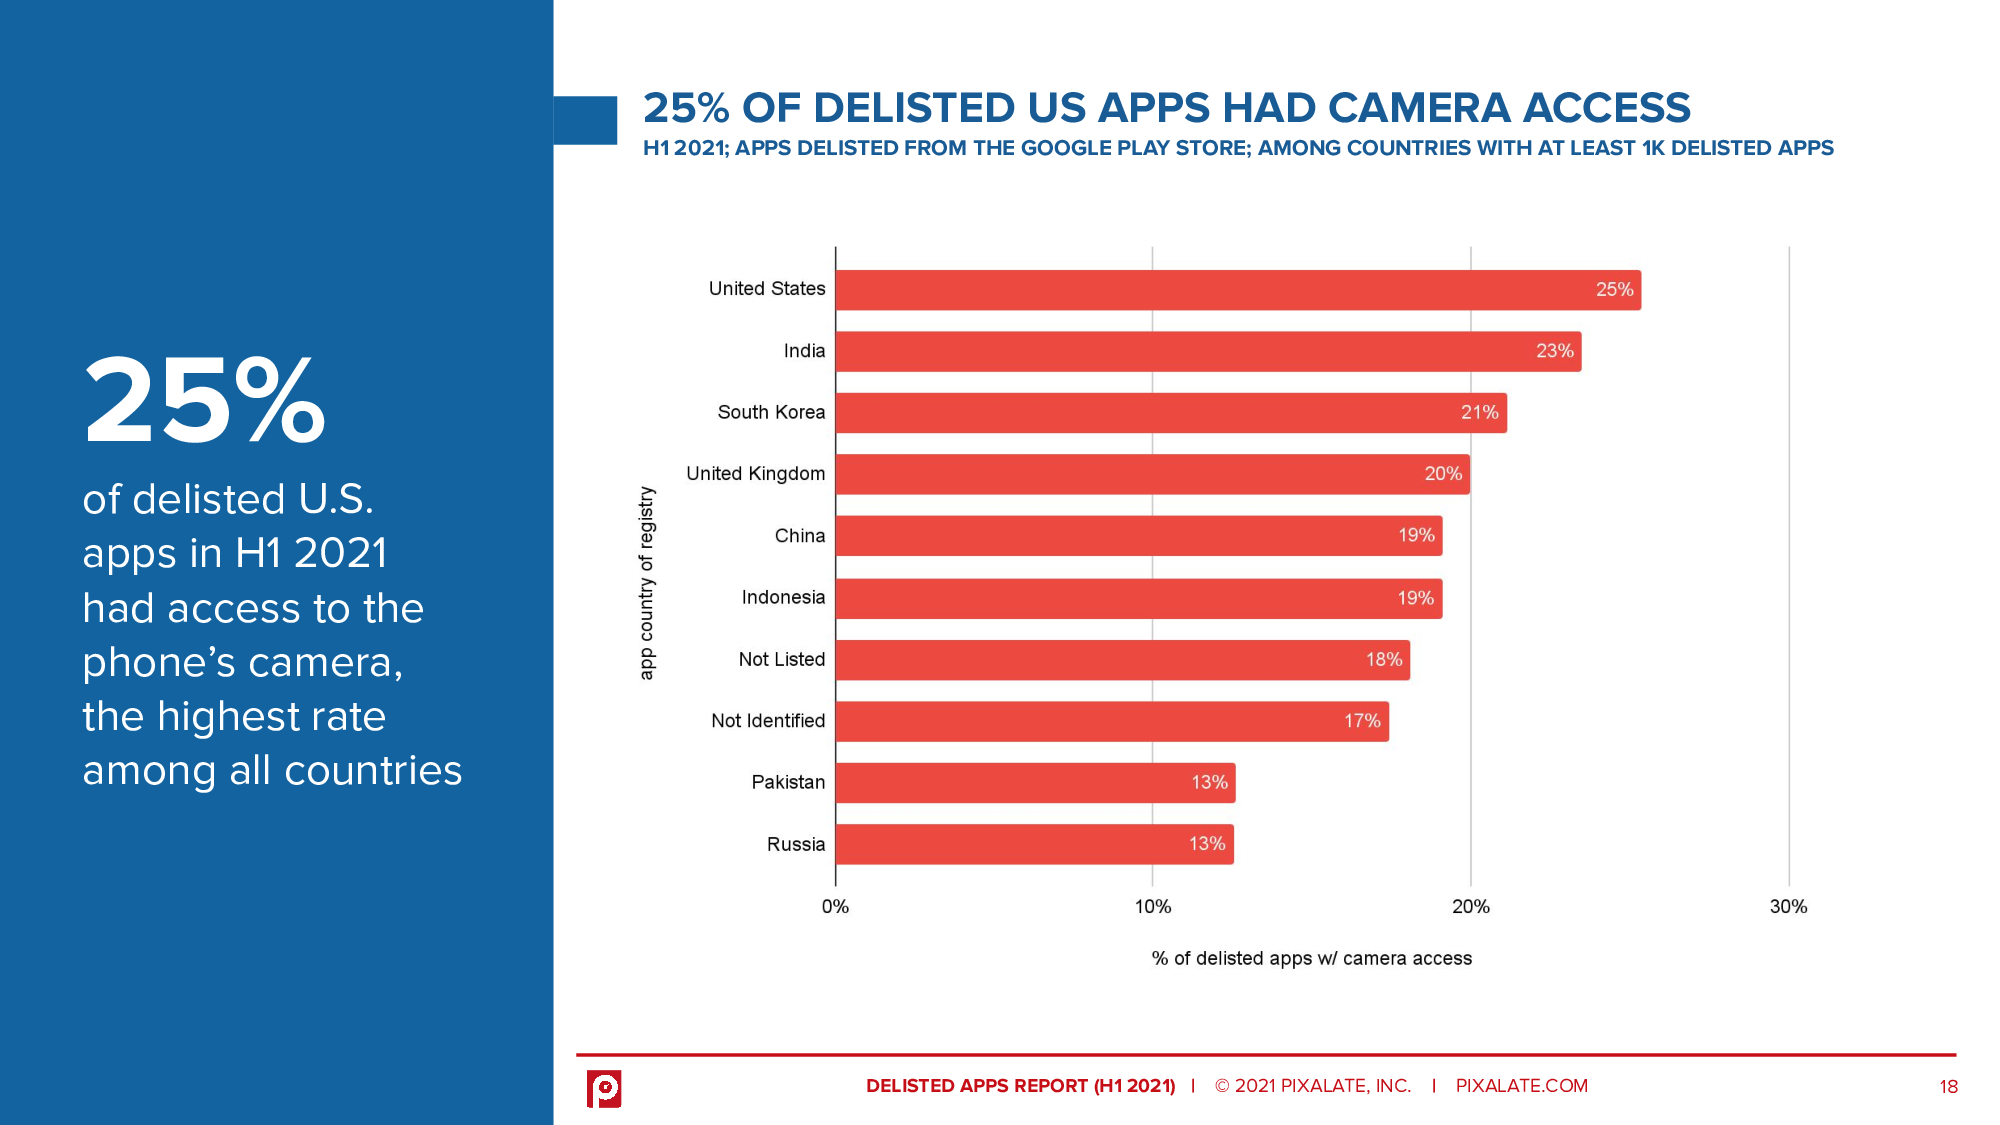 25% of delisted U.S. apps in H1 2021 had access to the phone’s camera, the highest rate among all countries